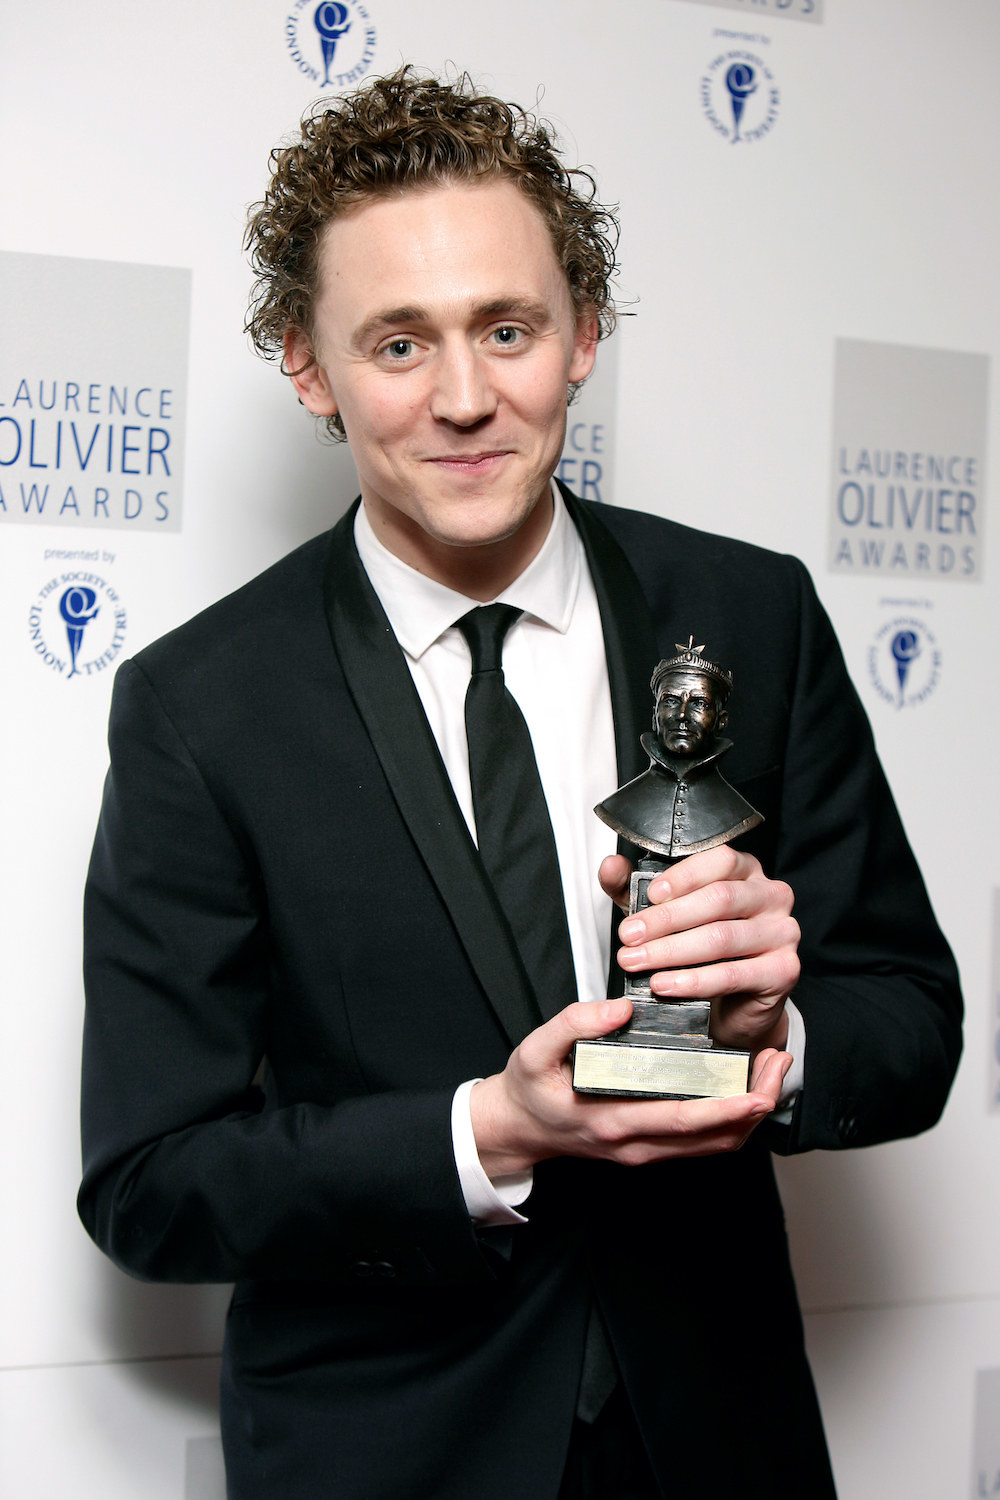 close up of Hiddleston holding an award with long curly hair